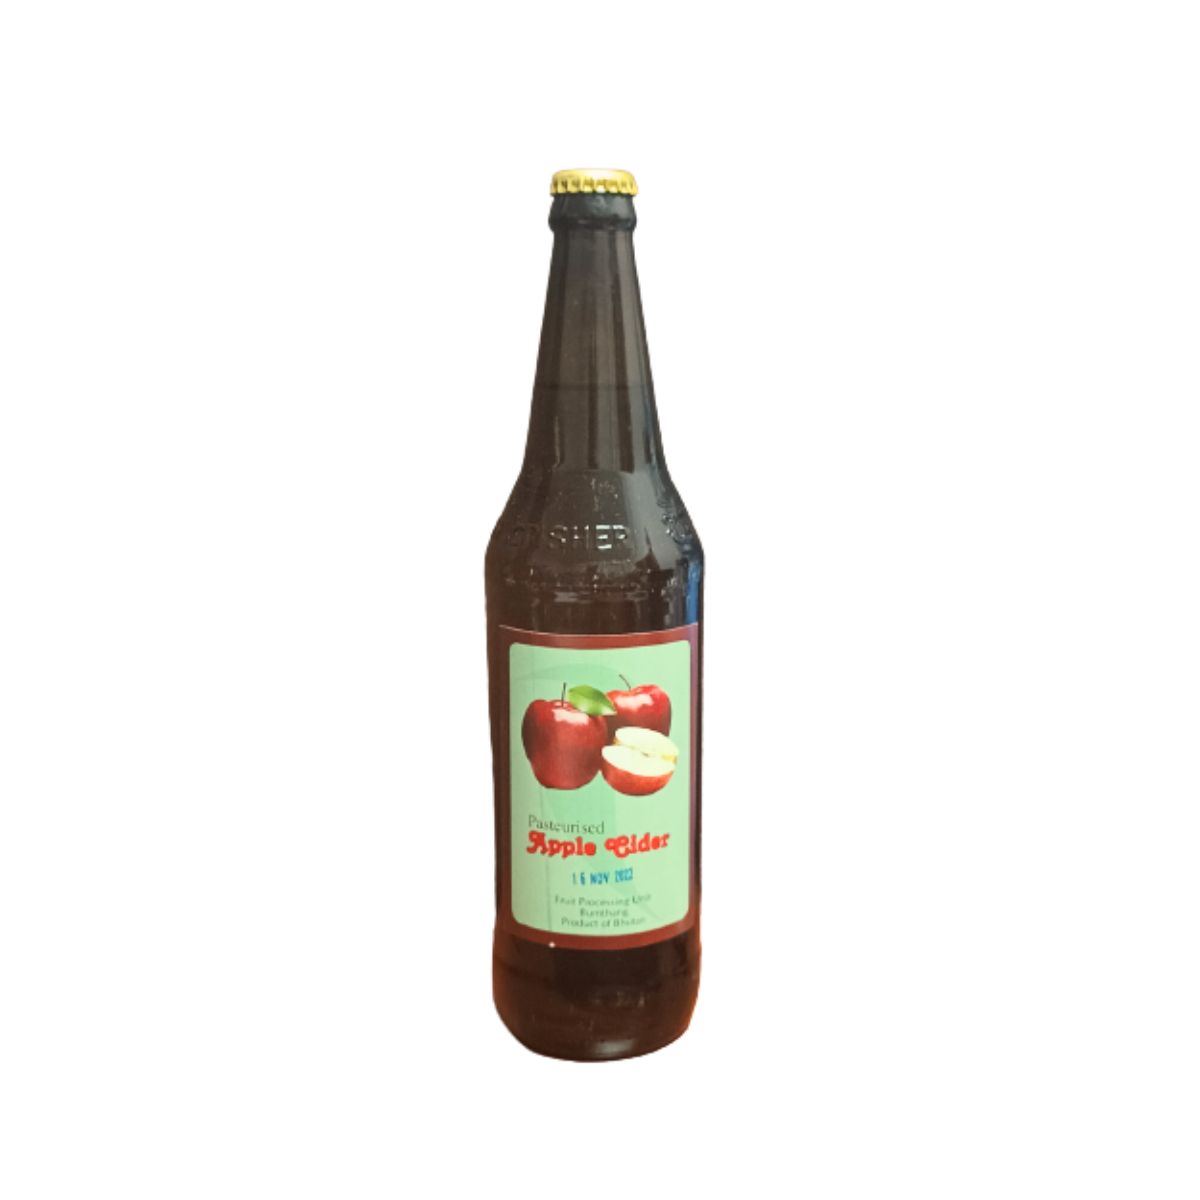 Bumthang Pasteurised Apple Cider - Bottle - 750ml